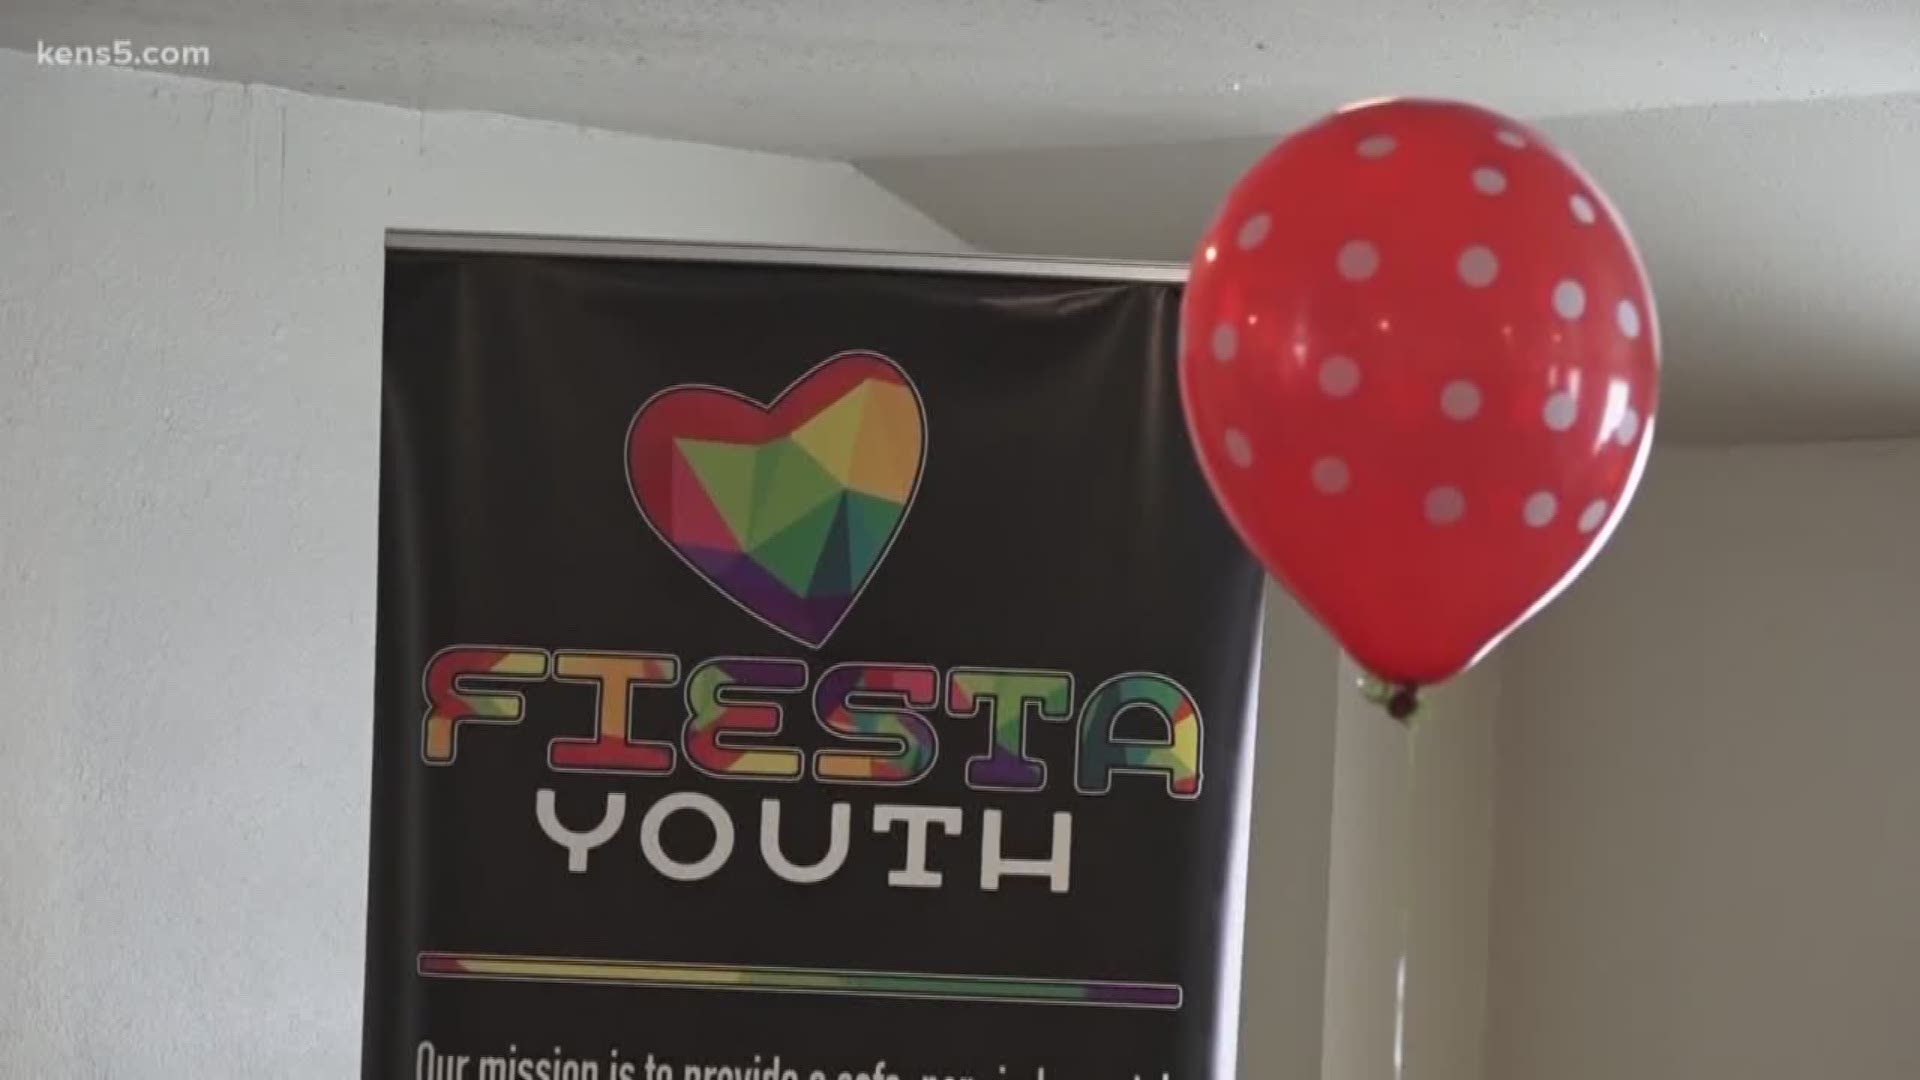 Fiesta Youth is a San Antonio nonprofit that organizes events and provides support to local queer teenagers and their families.